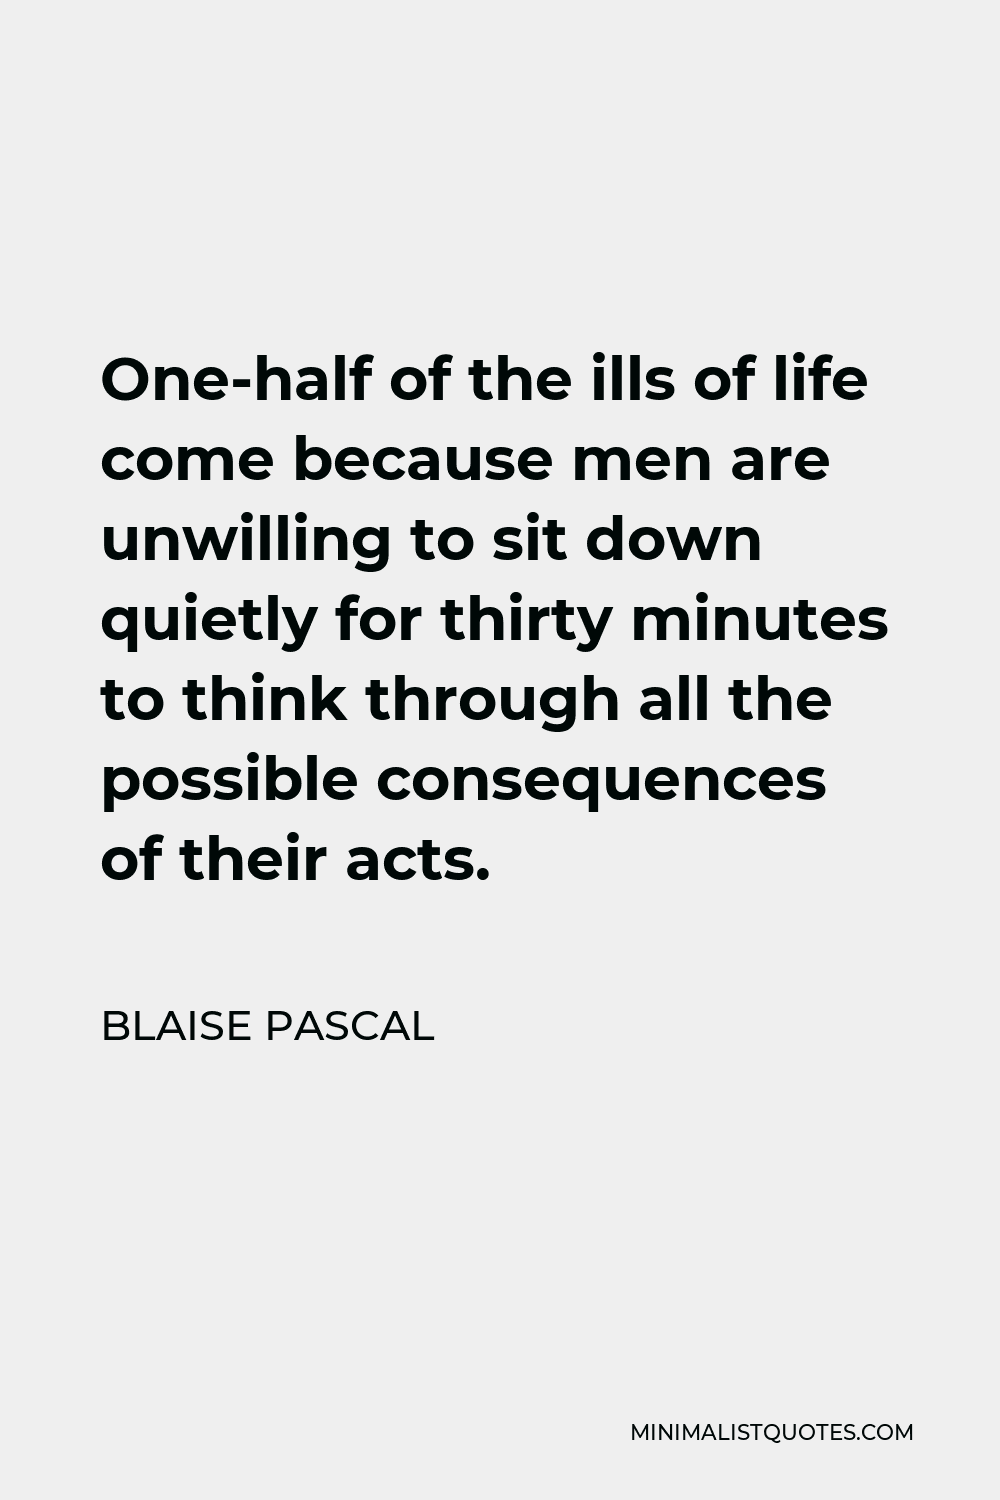 Blaise Pascal Quote - One-half of the ills of life come because men are unwilling to sit down quietly for thirty minutes to think through all the possible consequences of their acts.